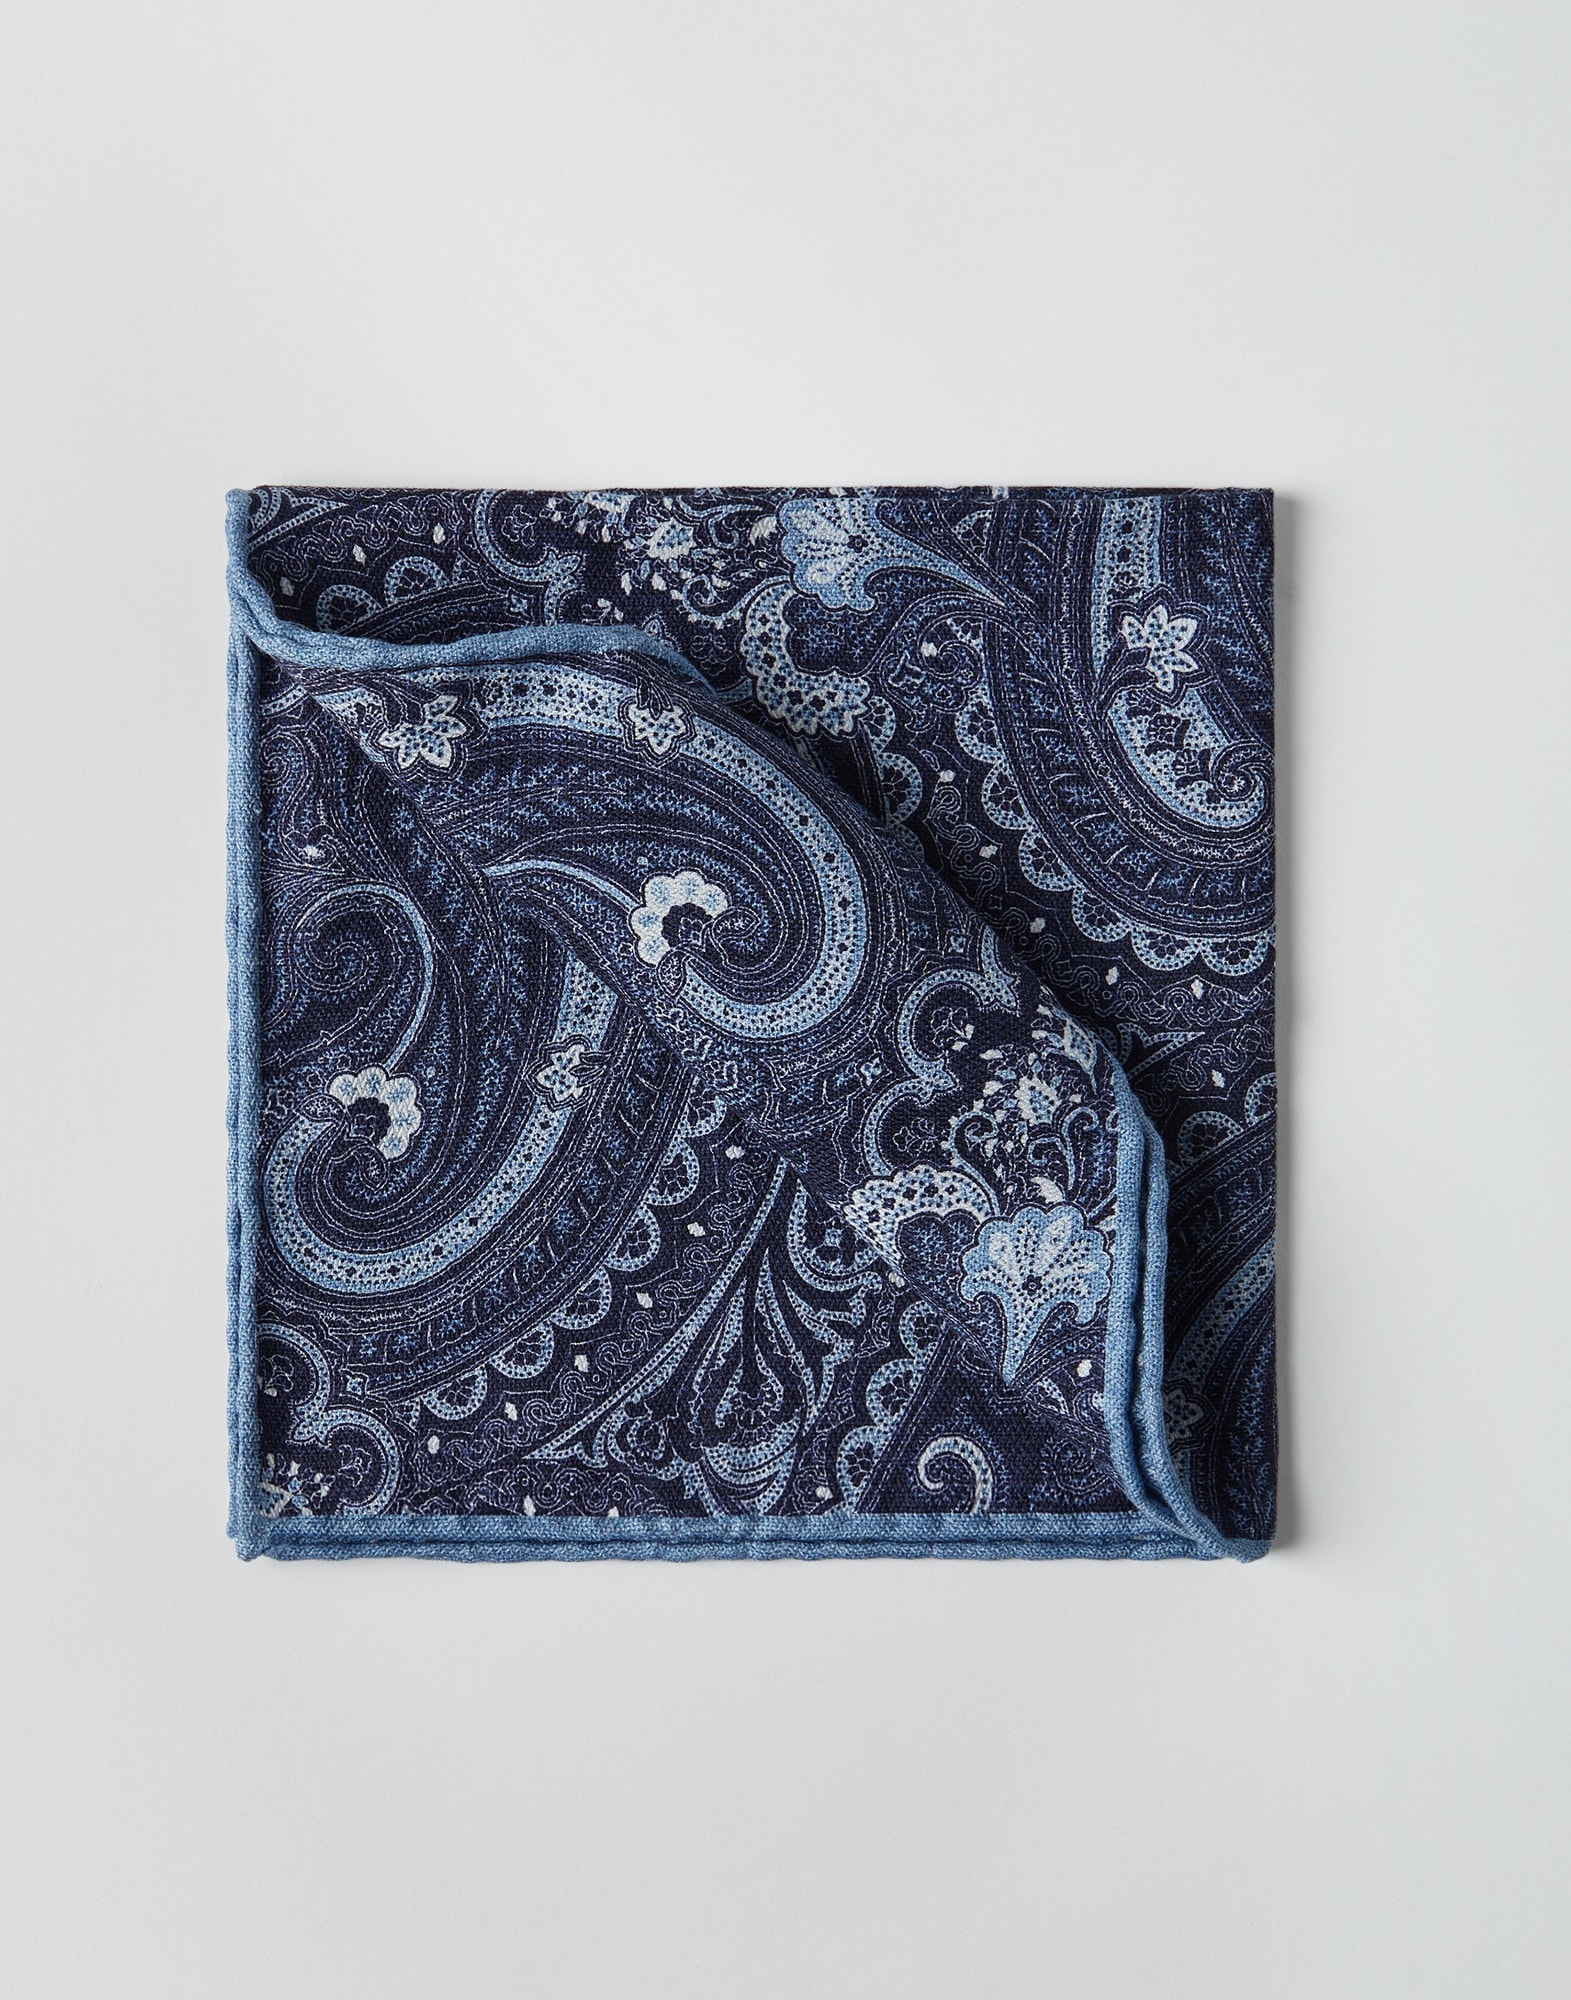 Double face silk pocket square with Paisley design - 1